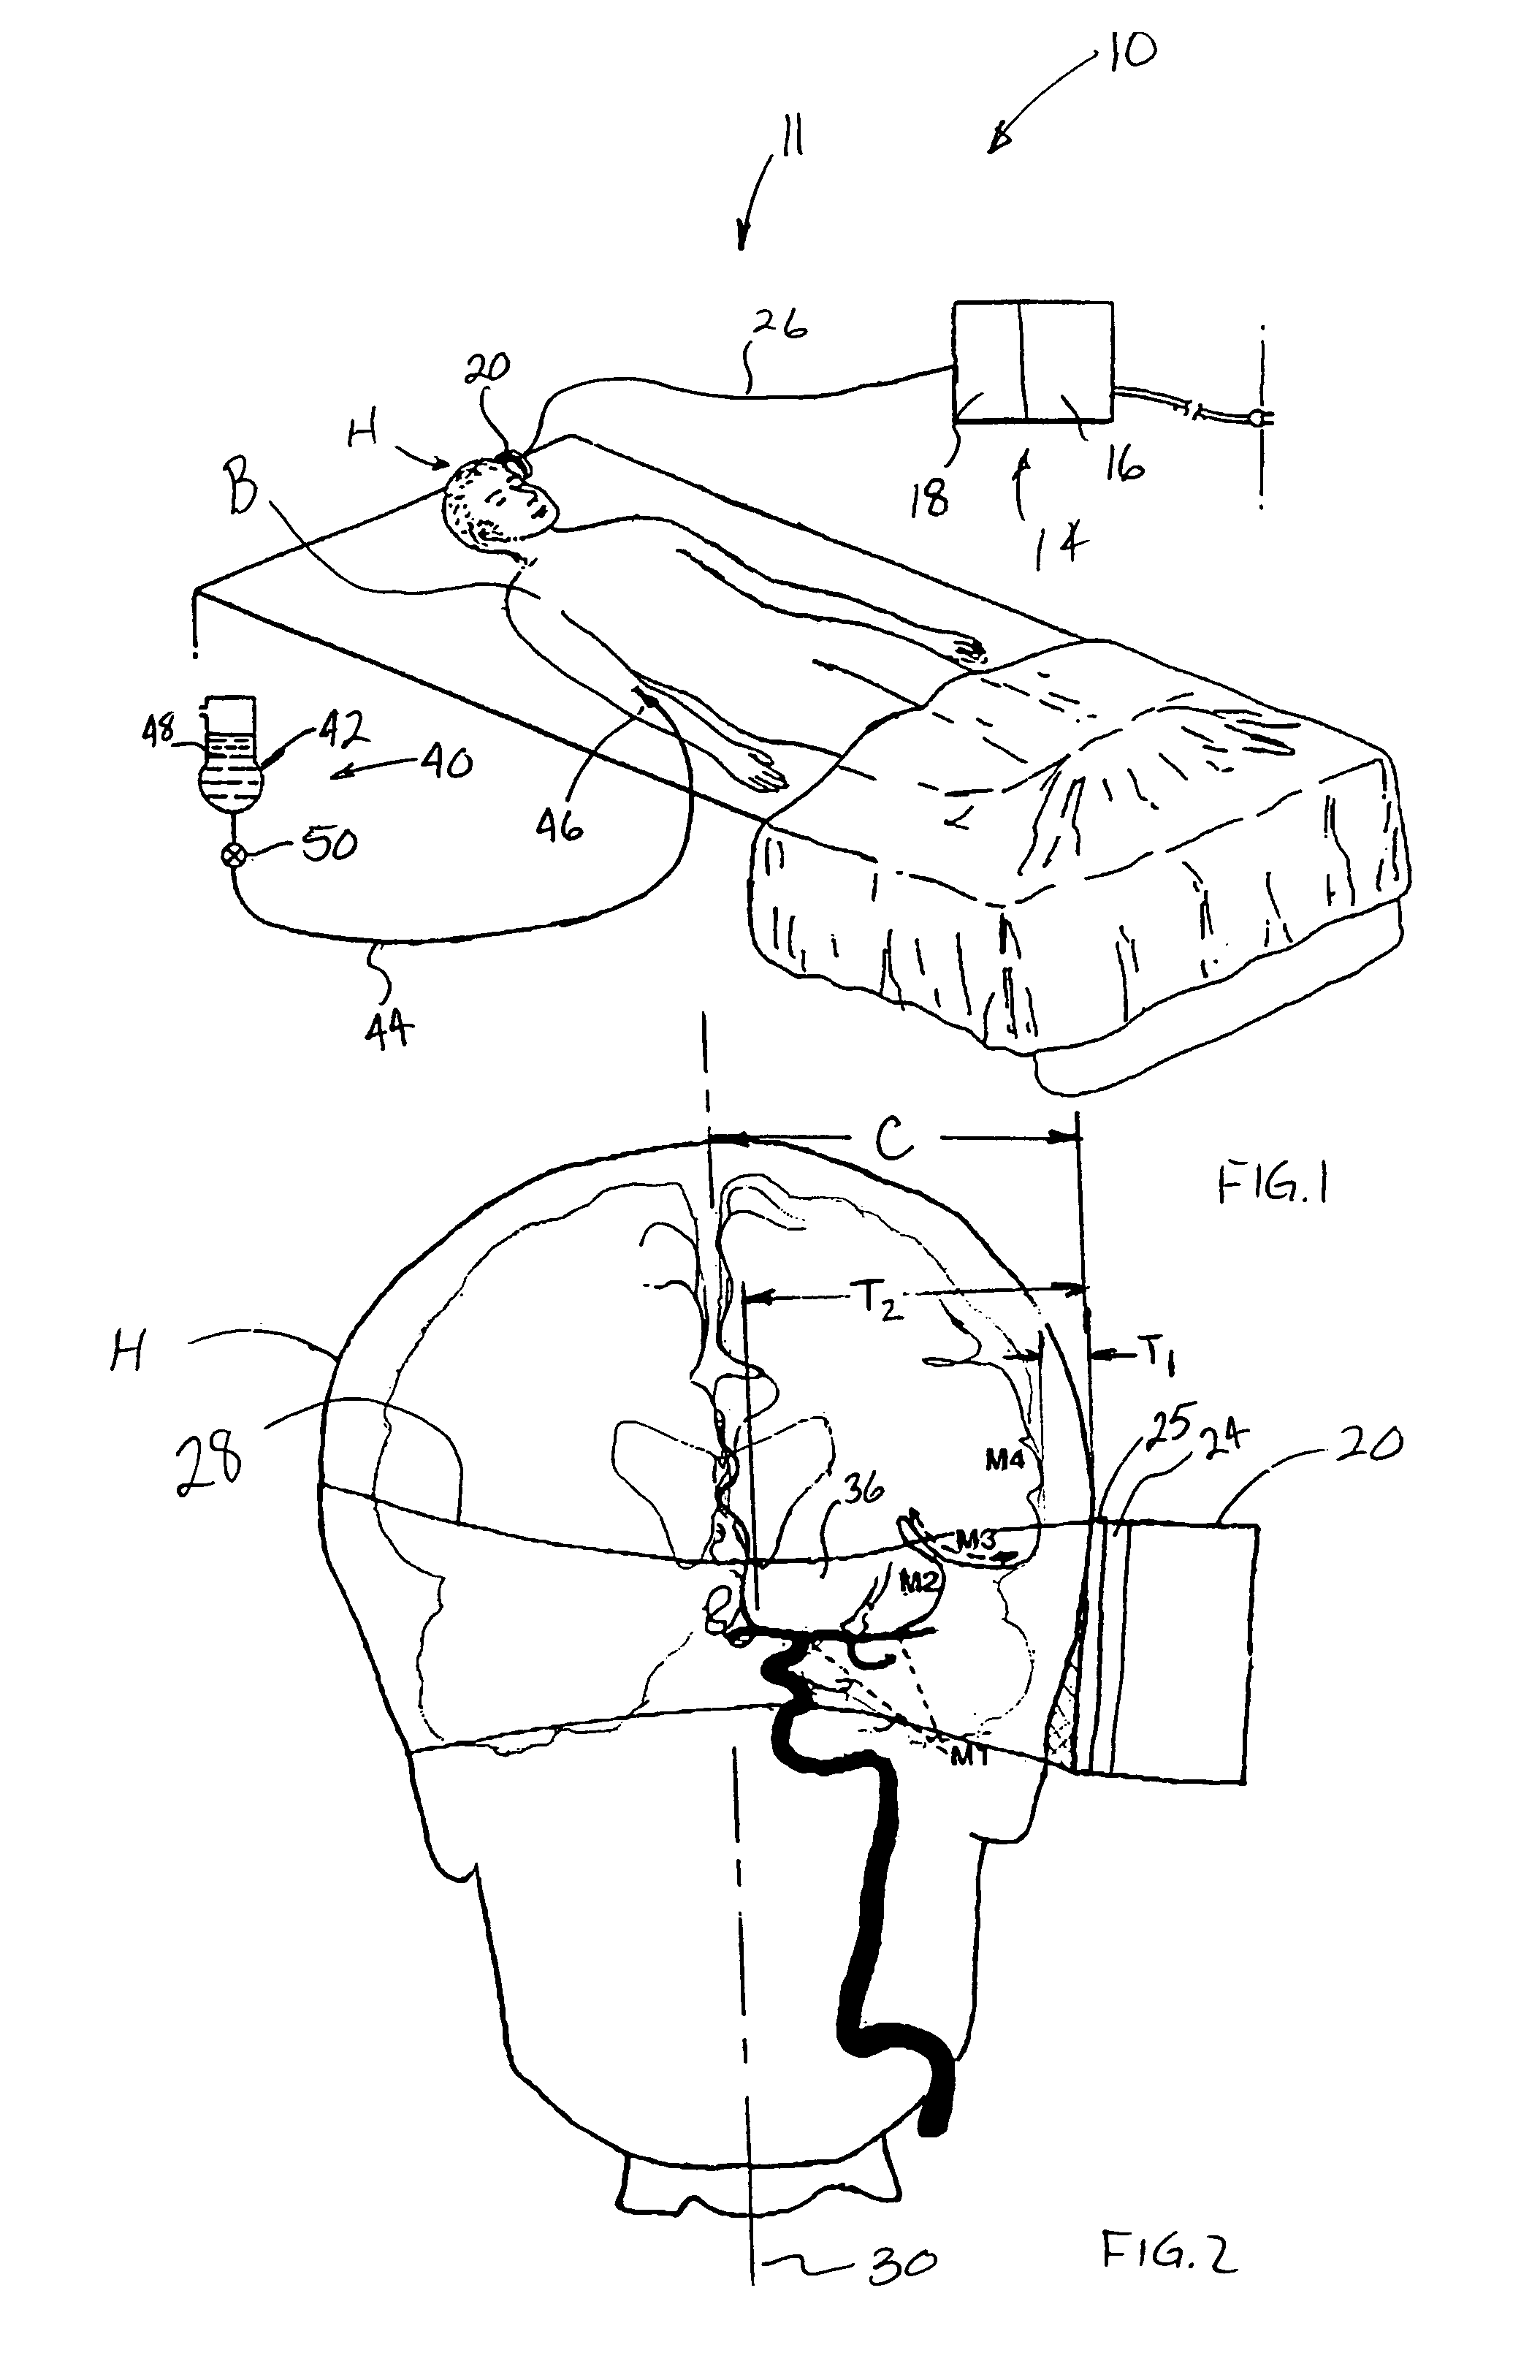 Transcranial ultrasound thrombolysis system and method of treating a stroke